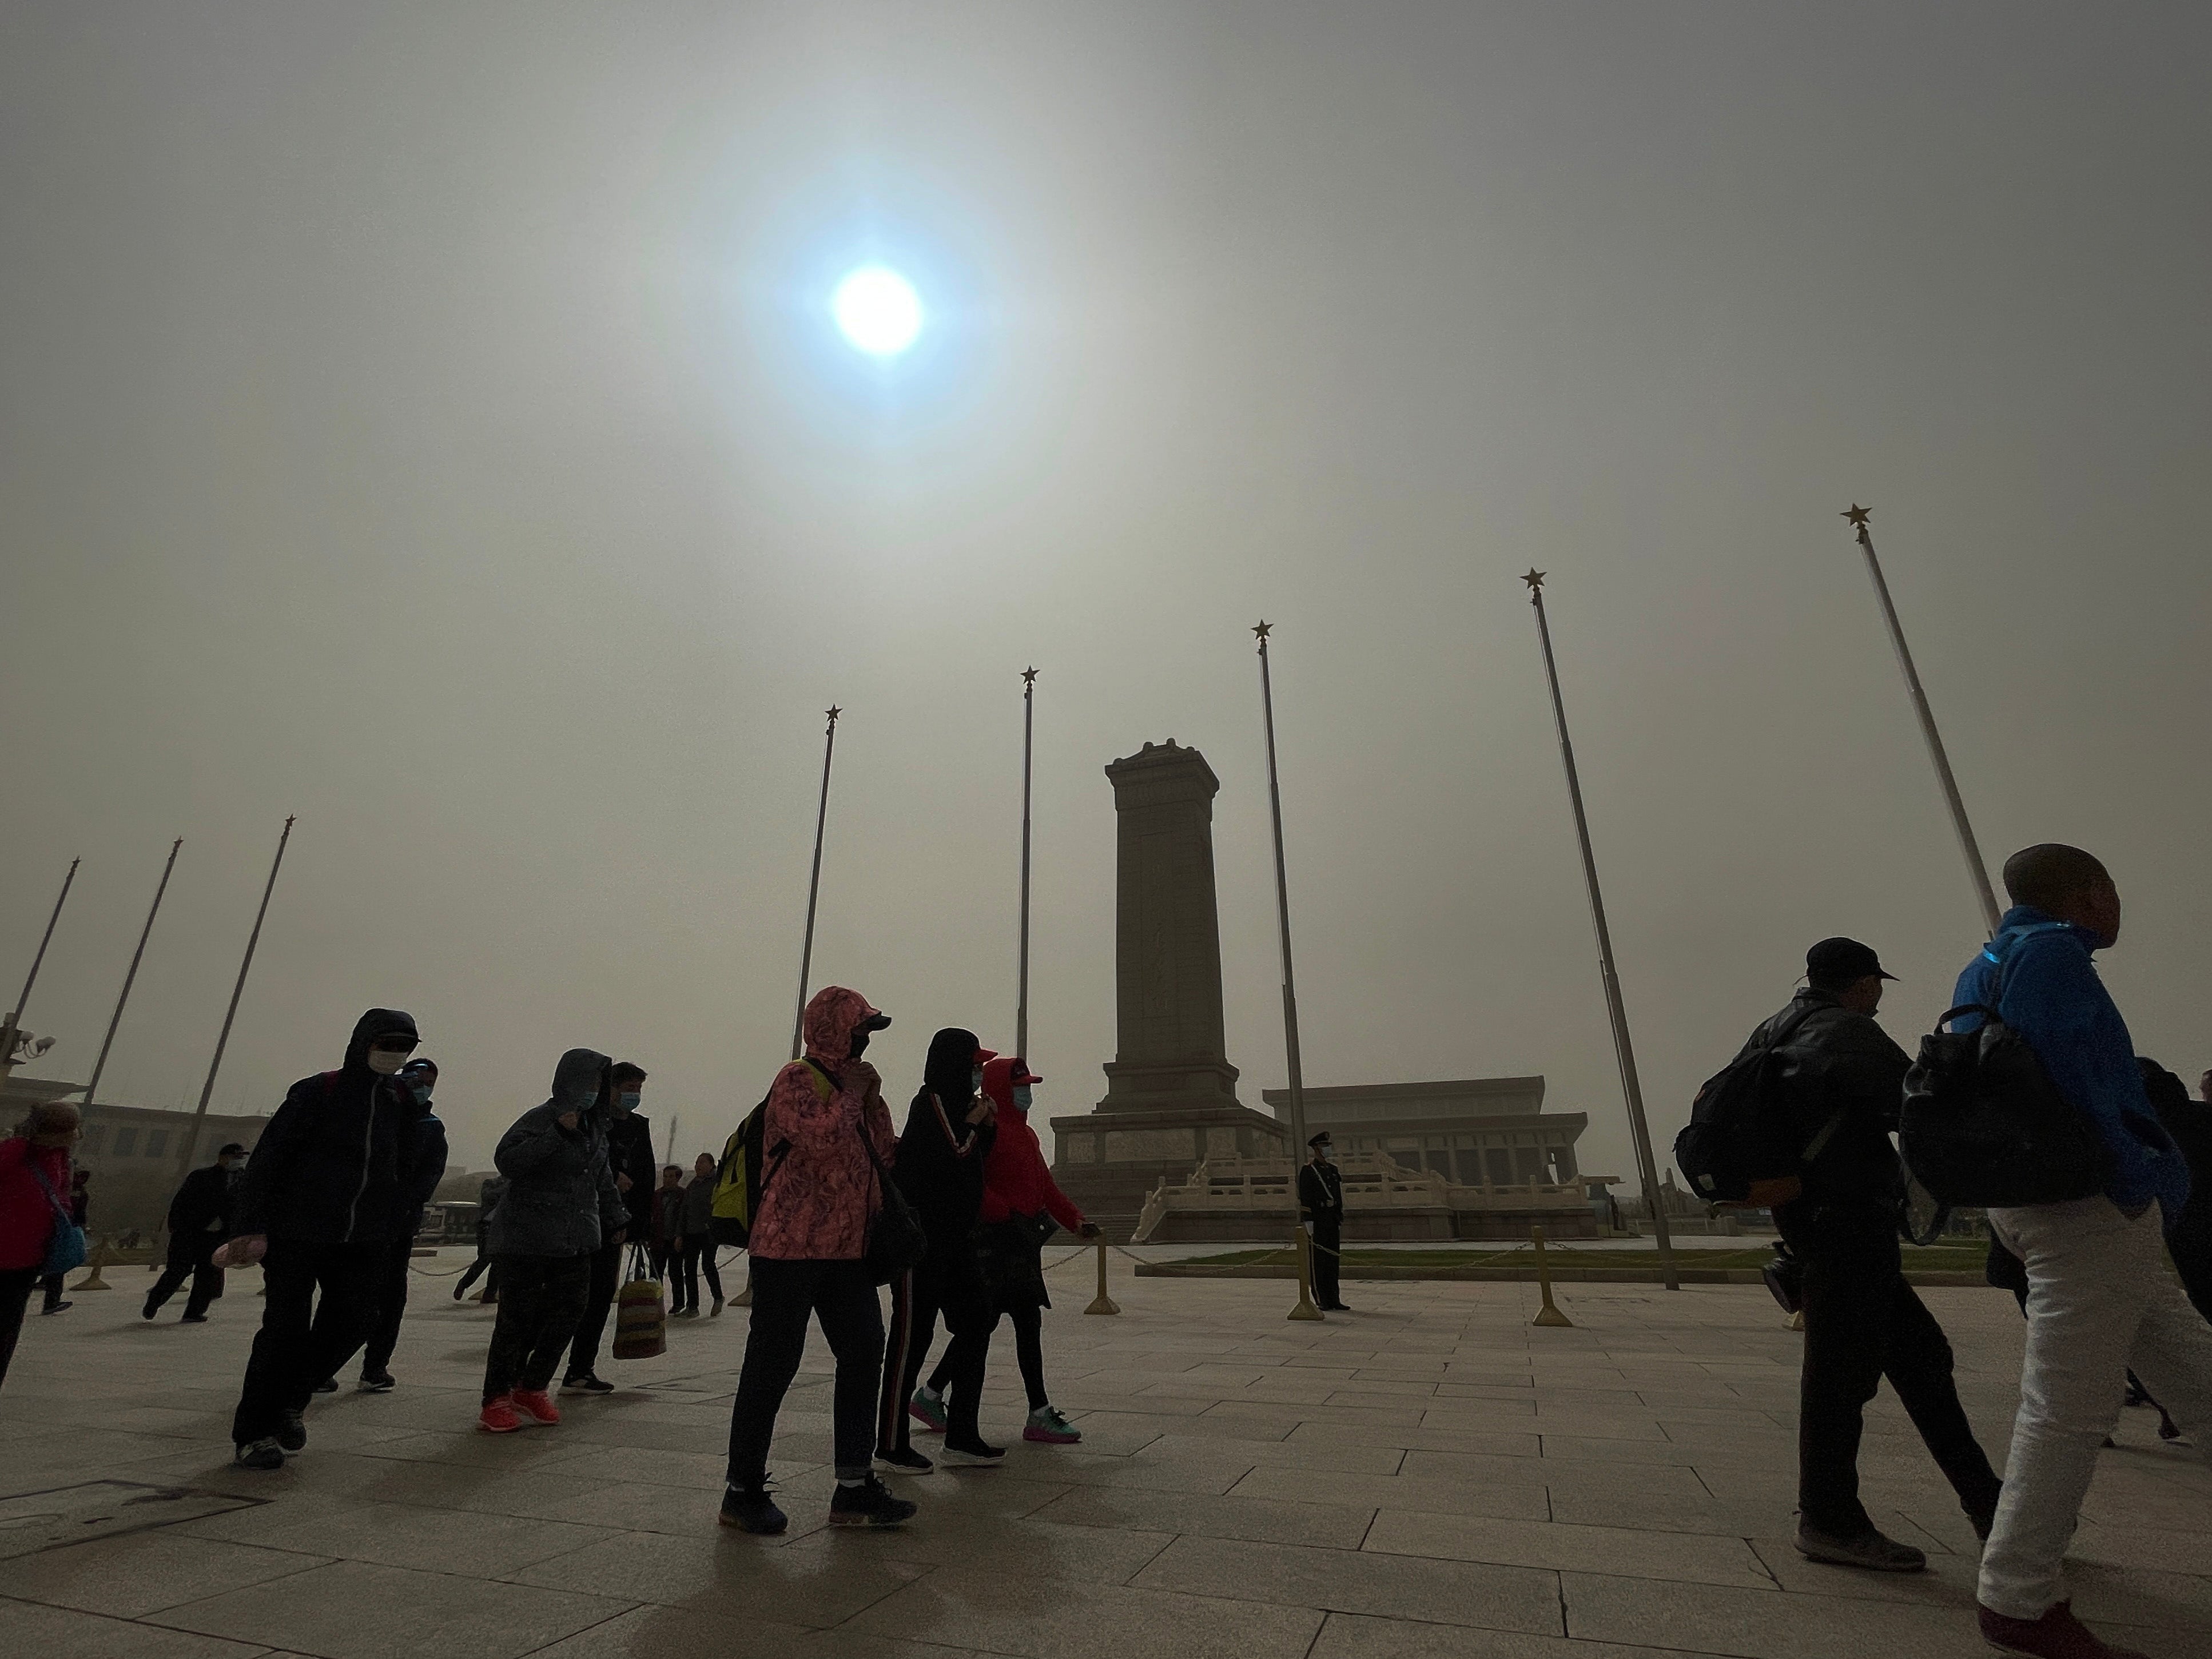 Mie scattering caused by a sandstorm in Beijing has reversed the colours of the sky